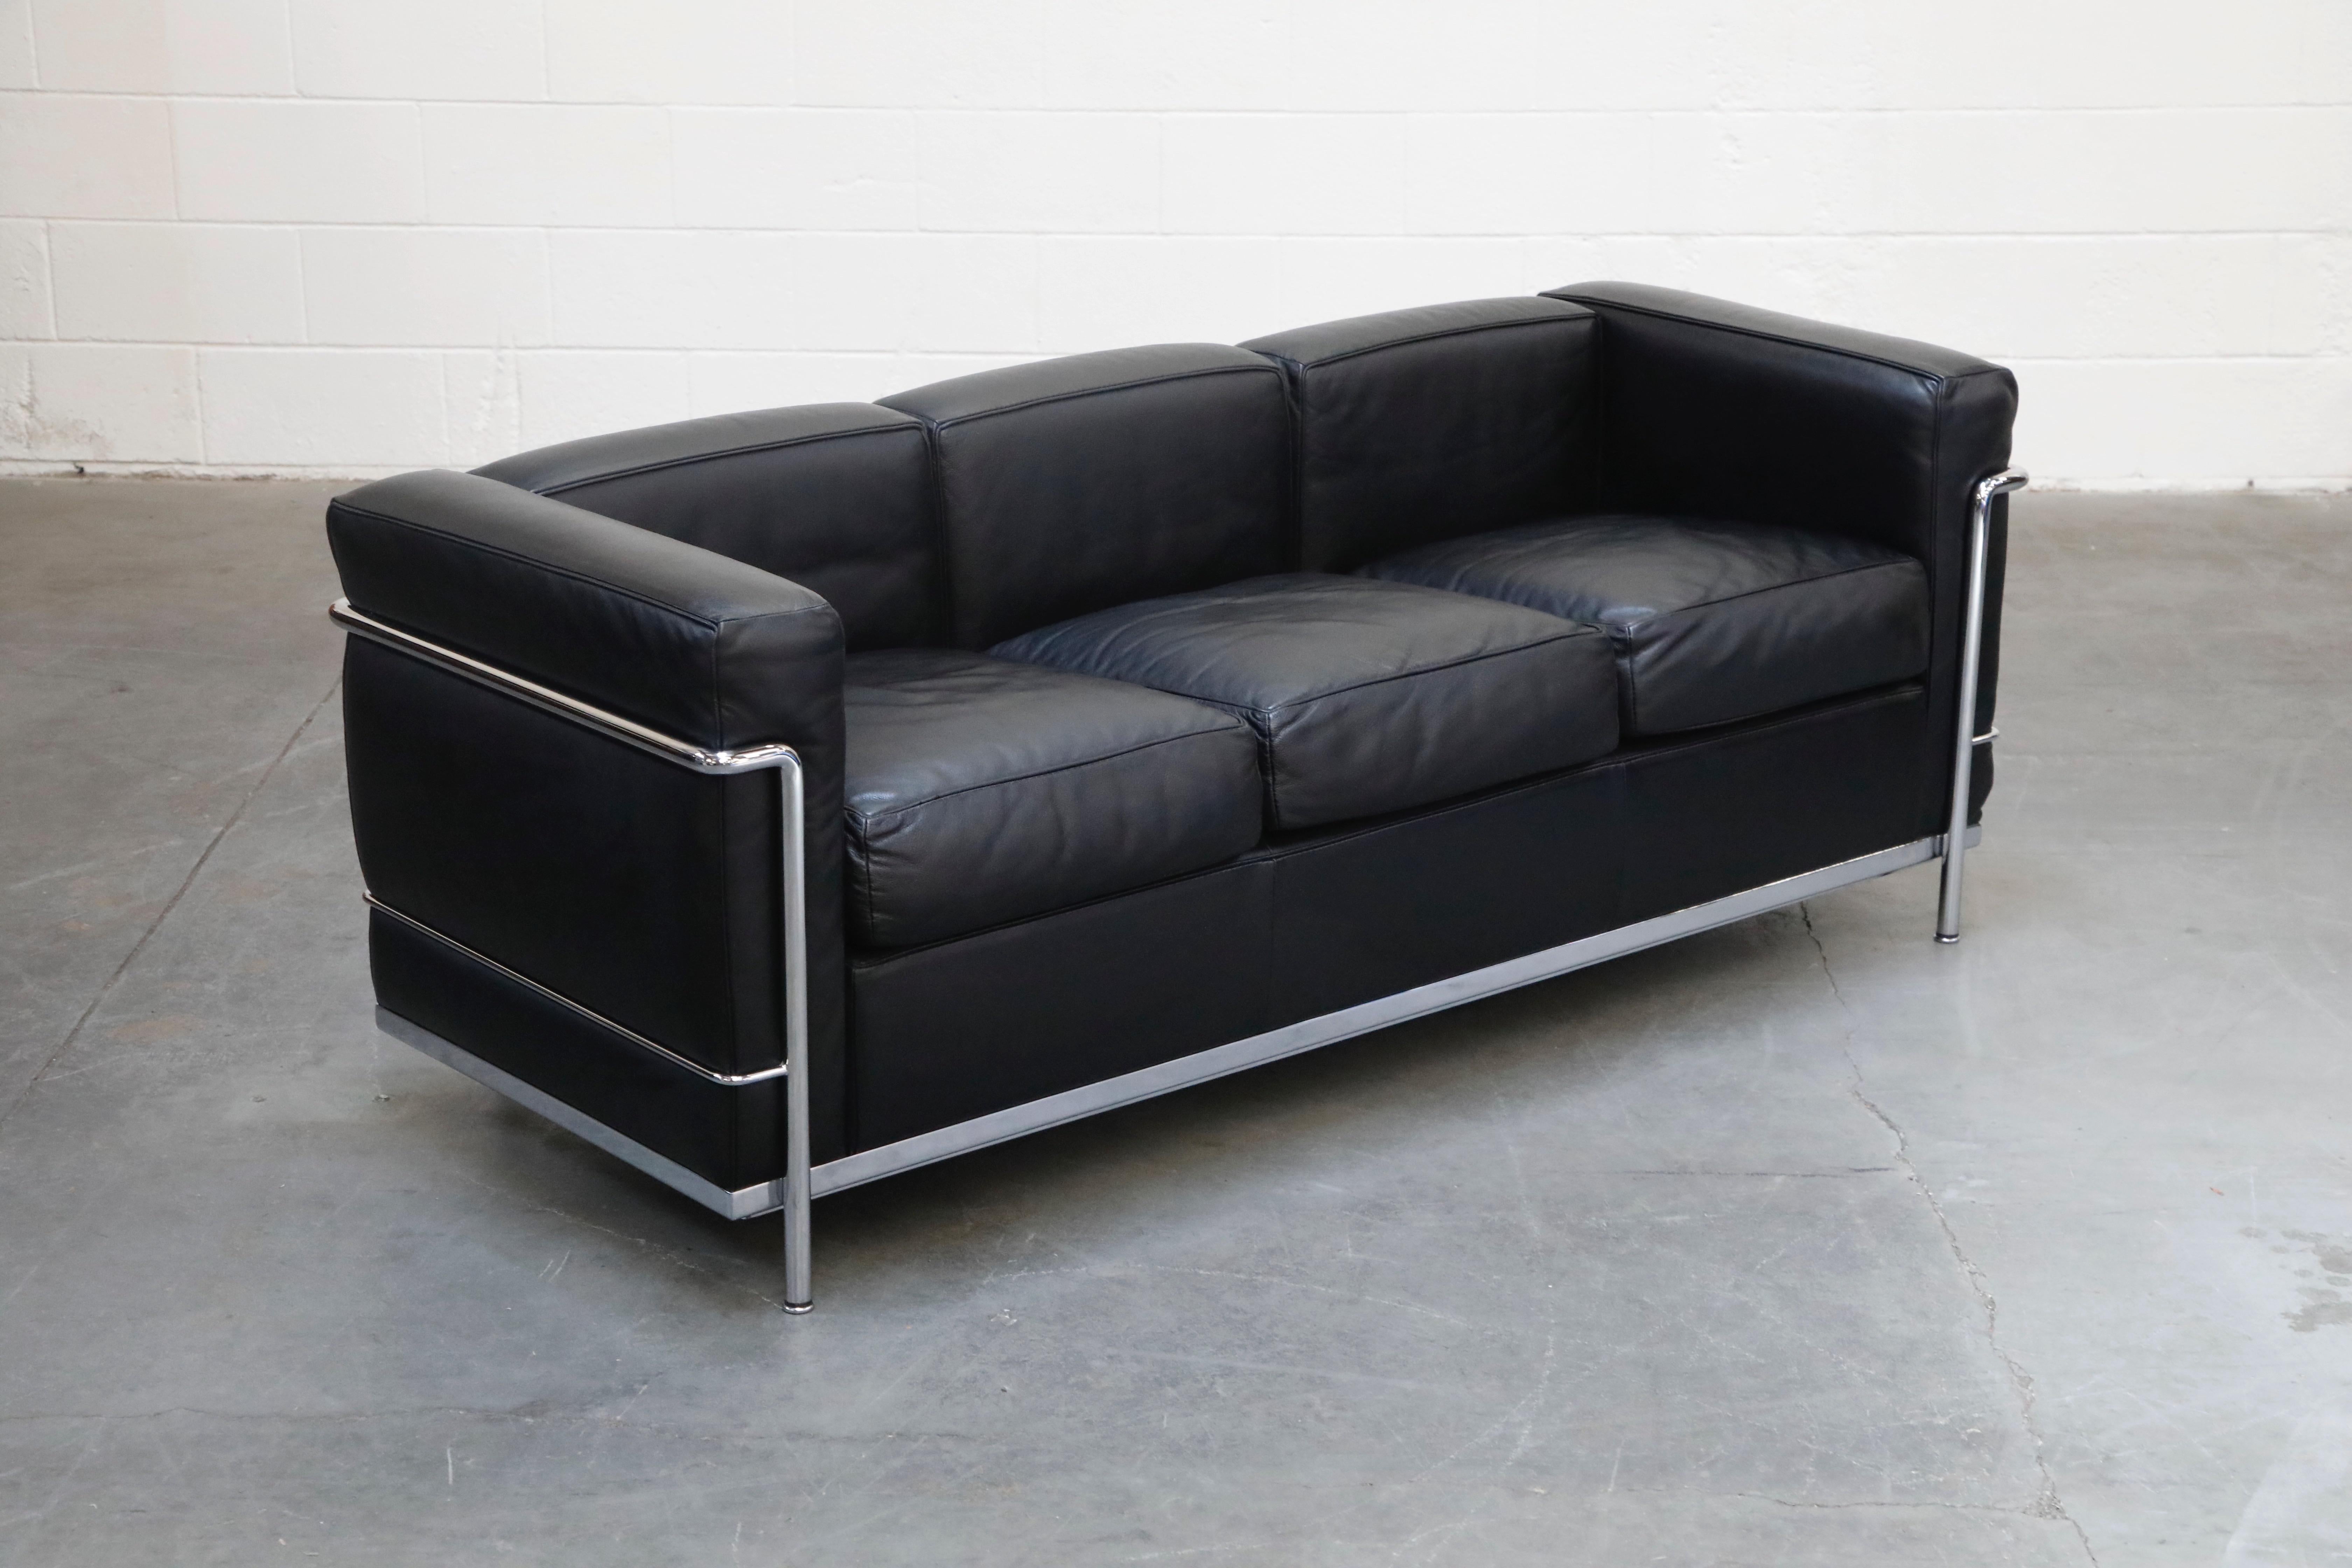 Bauhaus 'LC2' Three-Seat Sofa in Black Leather by Le Corbusier for Cassina, Signed